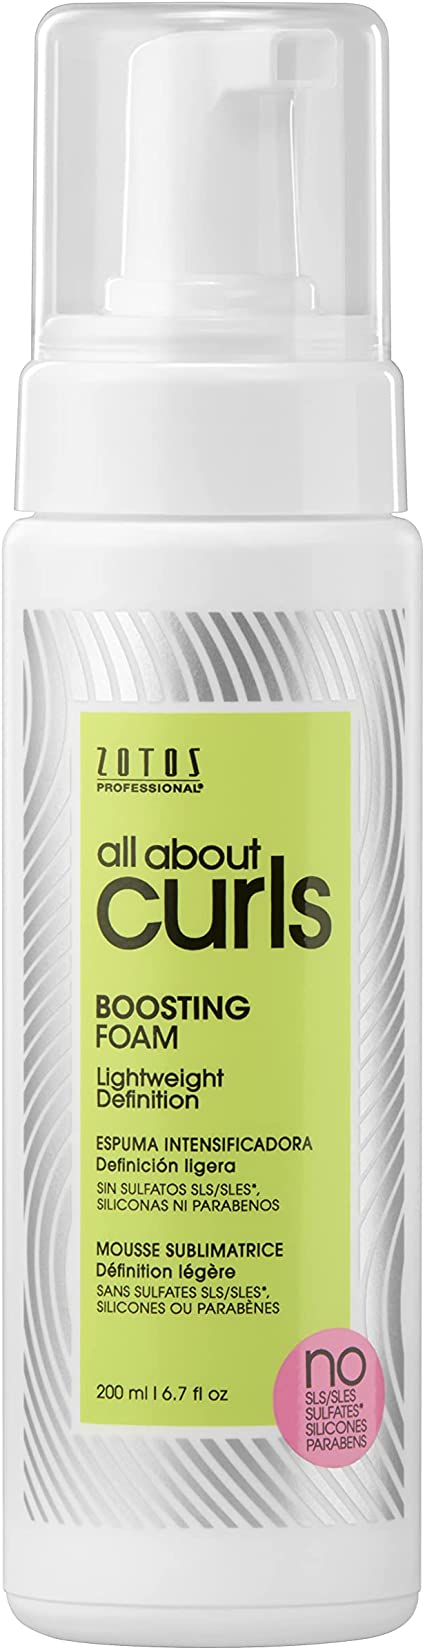 All About Curls No SLS/SLES Sulfates, Boosting Foam, Silicones & Parabens/Color-safe, 6.7-Ounce, 200 ml (Pack of 1)